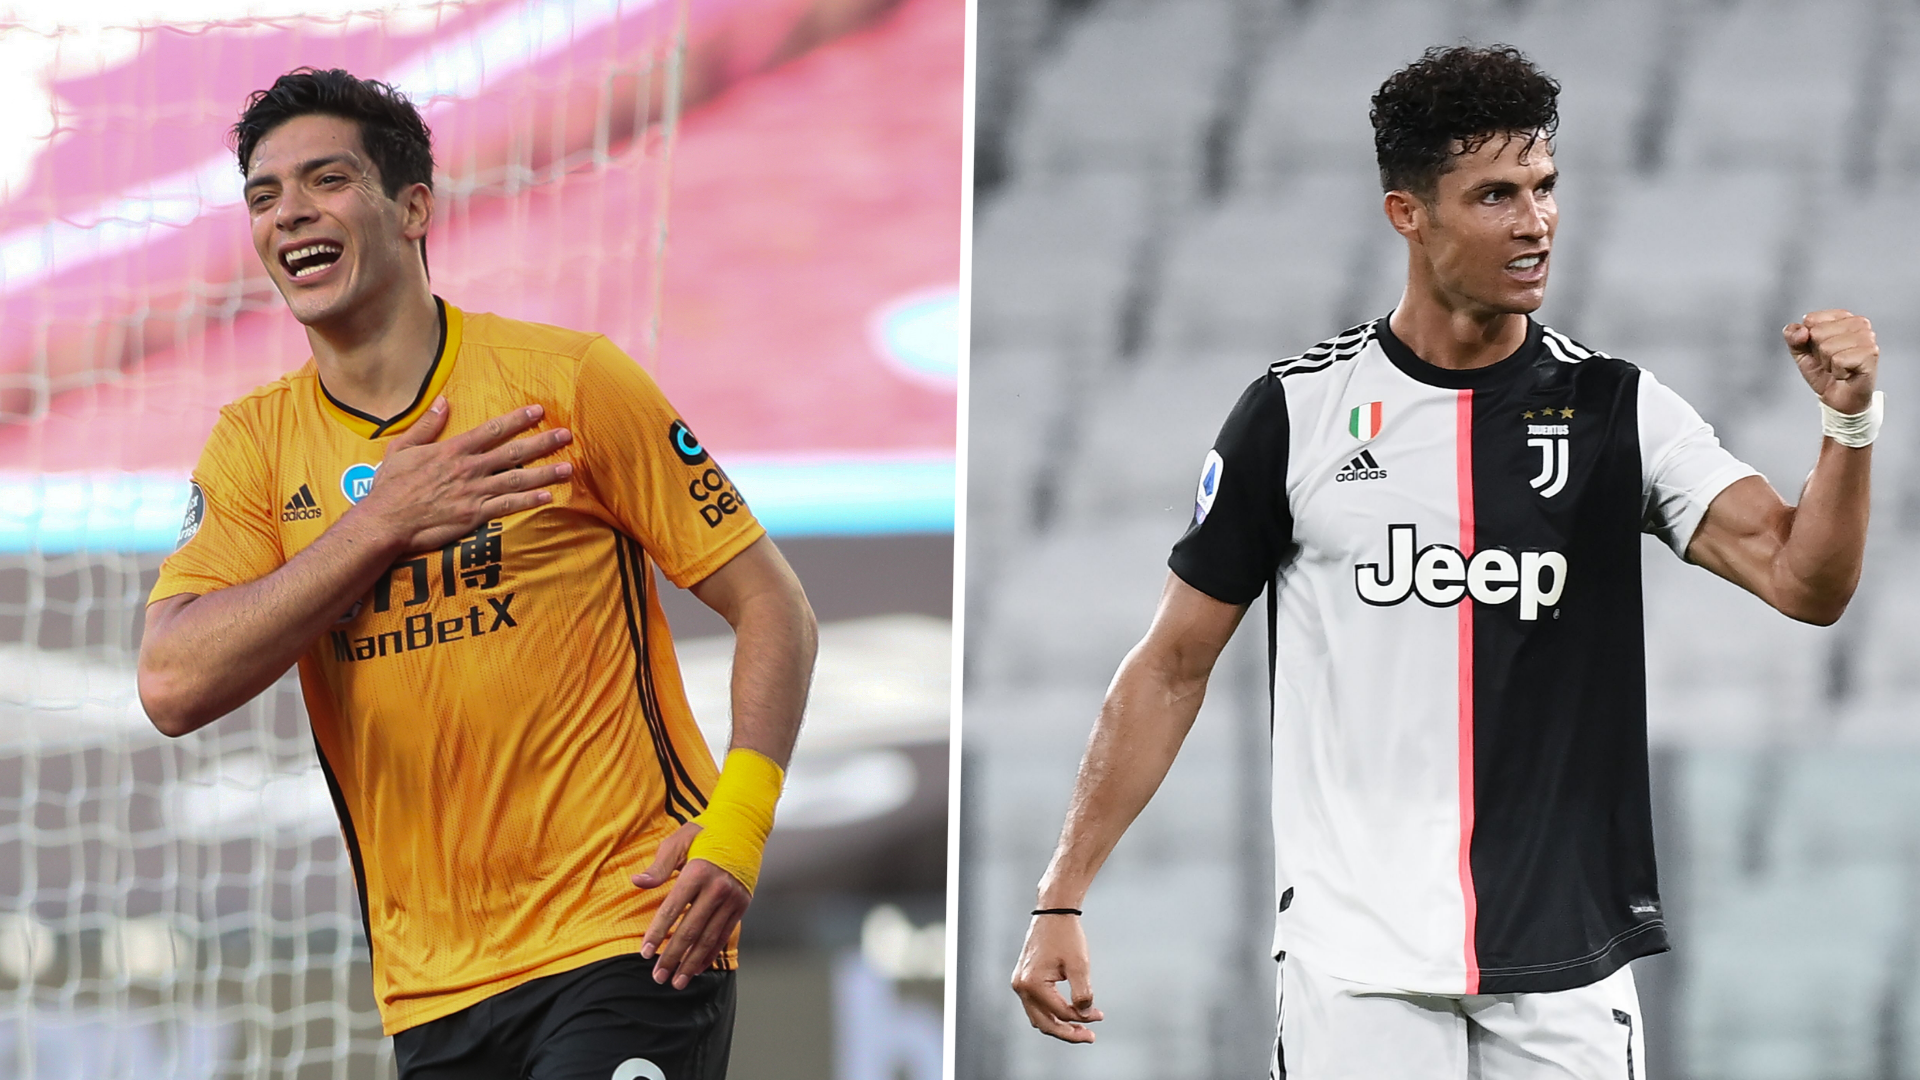 Wolves star Jimenez could be the new Benzema for Ronaldo, says Capello